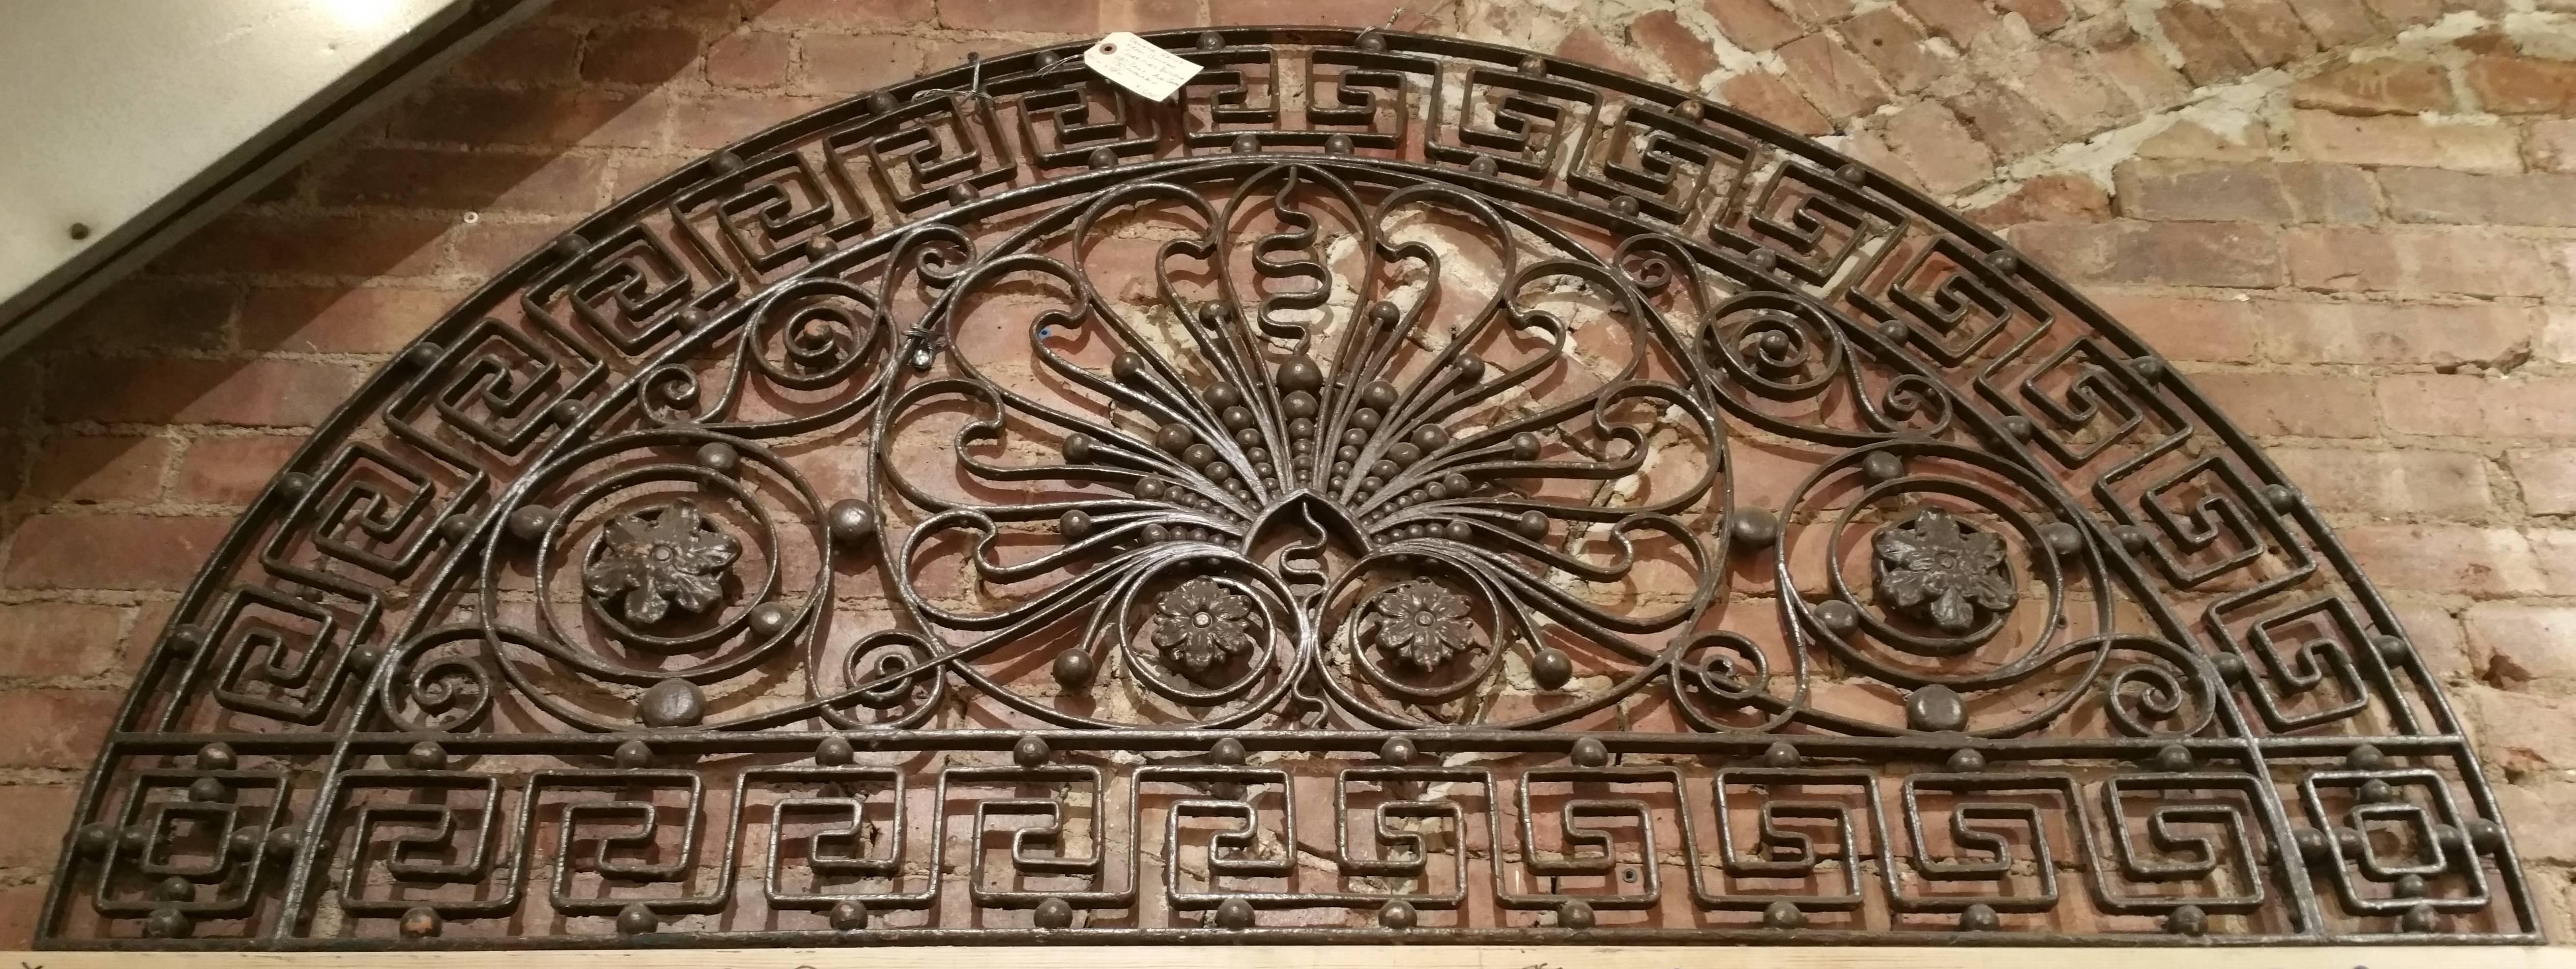 1893 Ornate Wrought Iron Grill from the United Charities Building in Manhattan 1